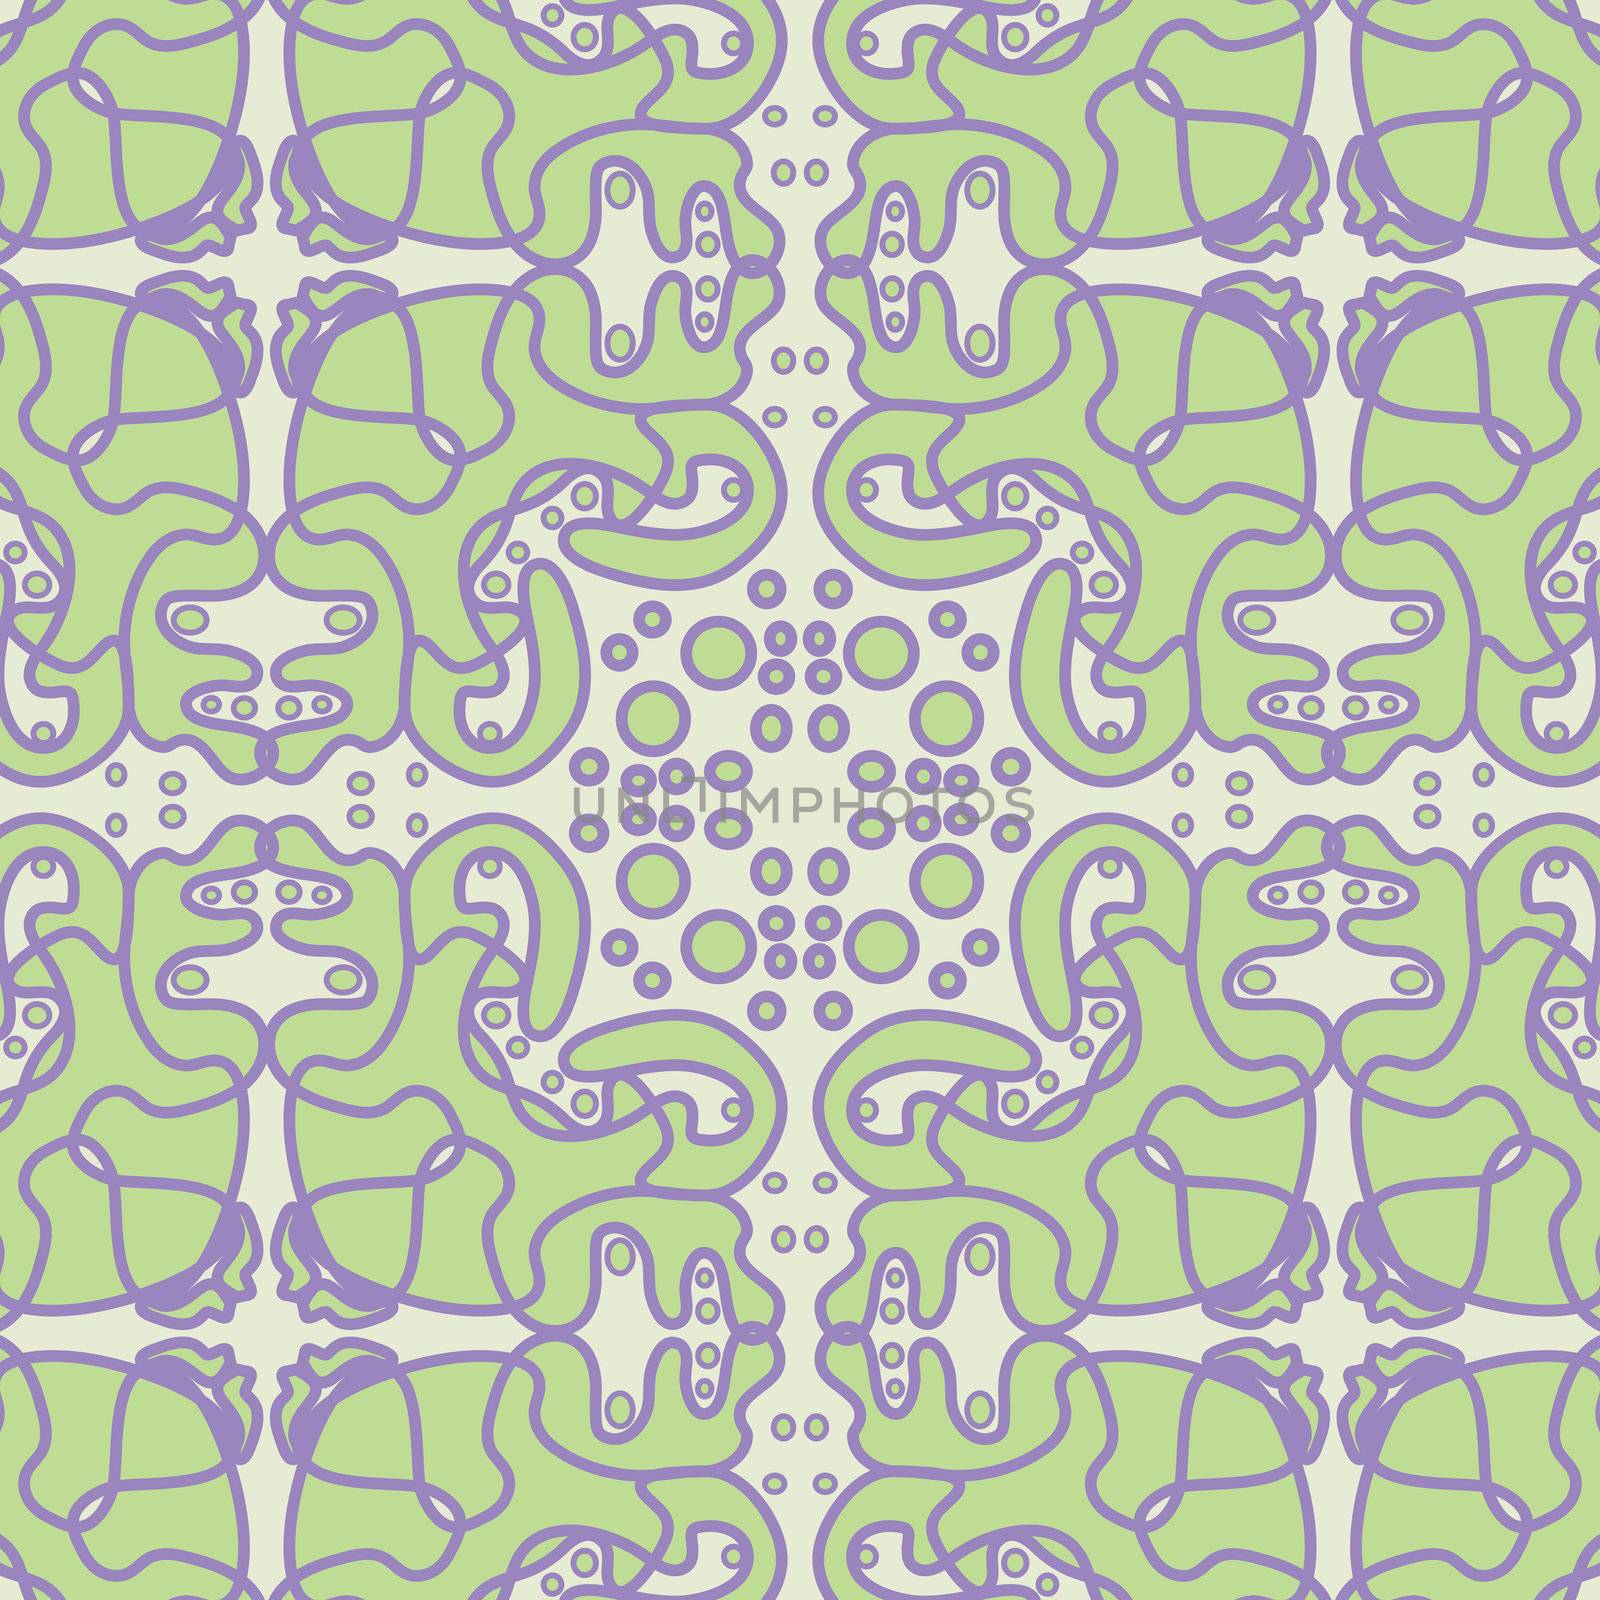 Seamless background of green fluffy shapes and purple lines